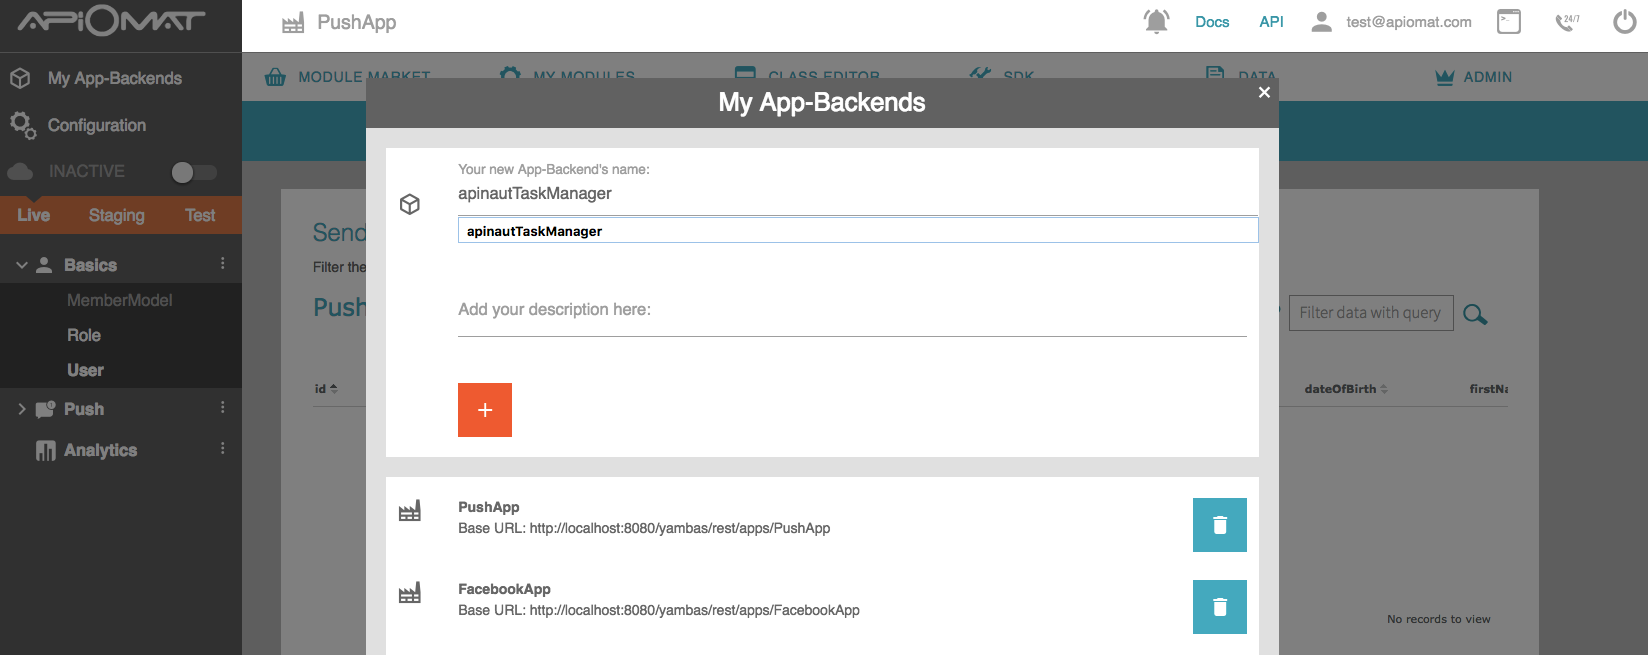 images/download/attachments/61478474/taskManager_newBackend.png